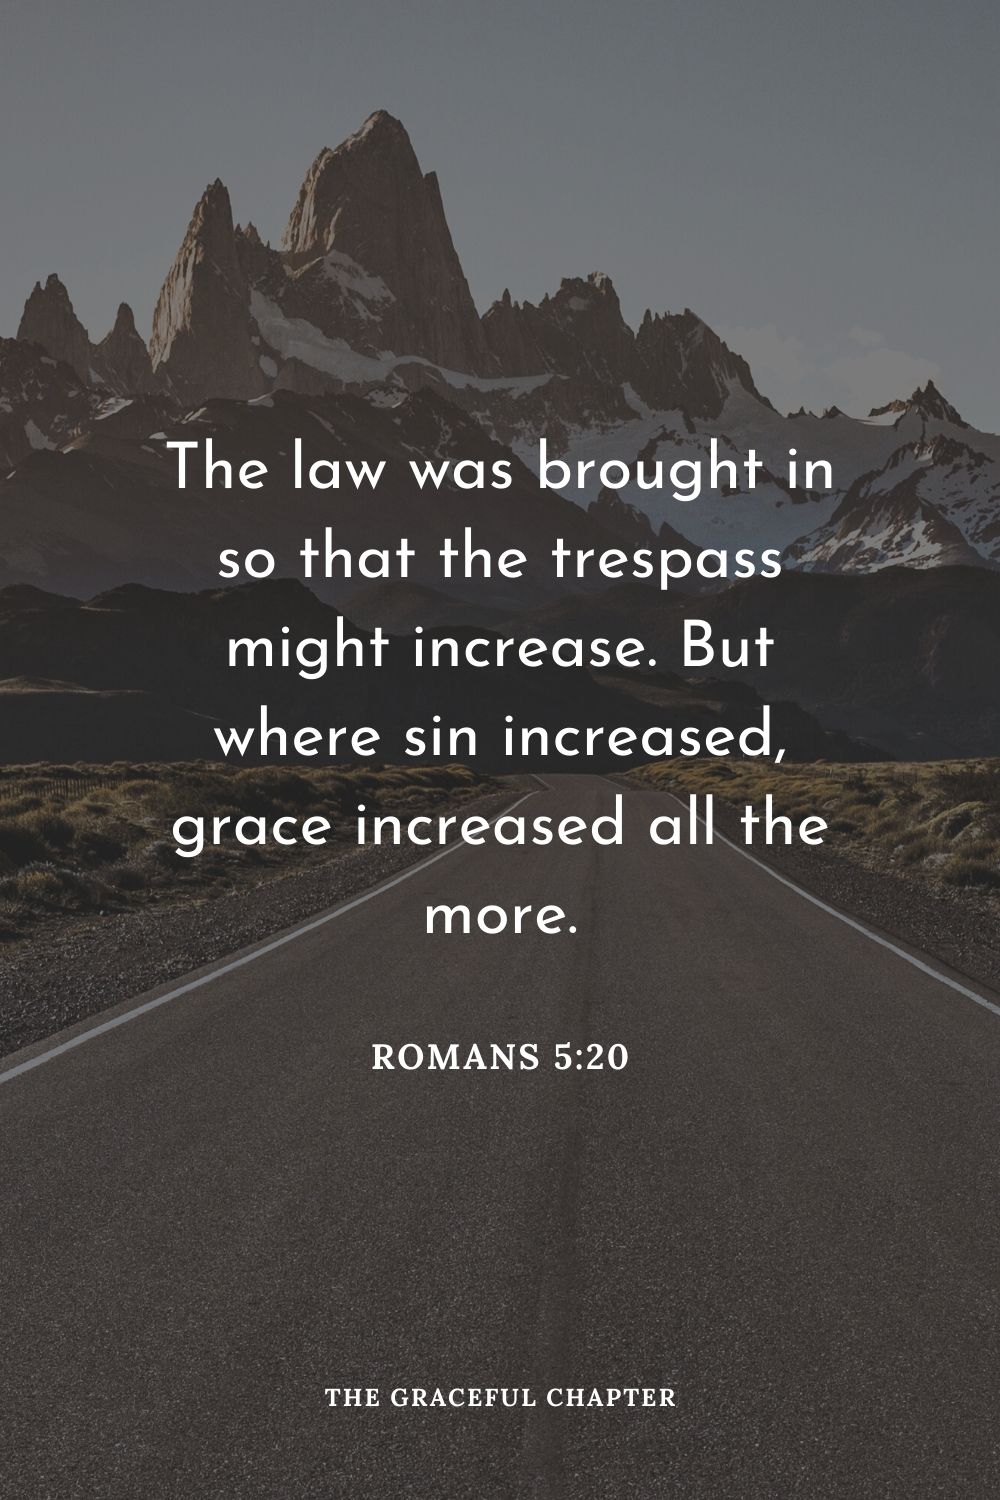 The law was brought in so that the trespass might increase. But where sin increased, grace increased all the more. Romans 5:20